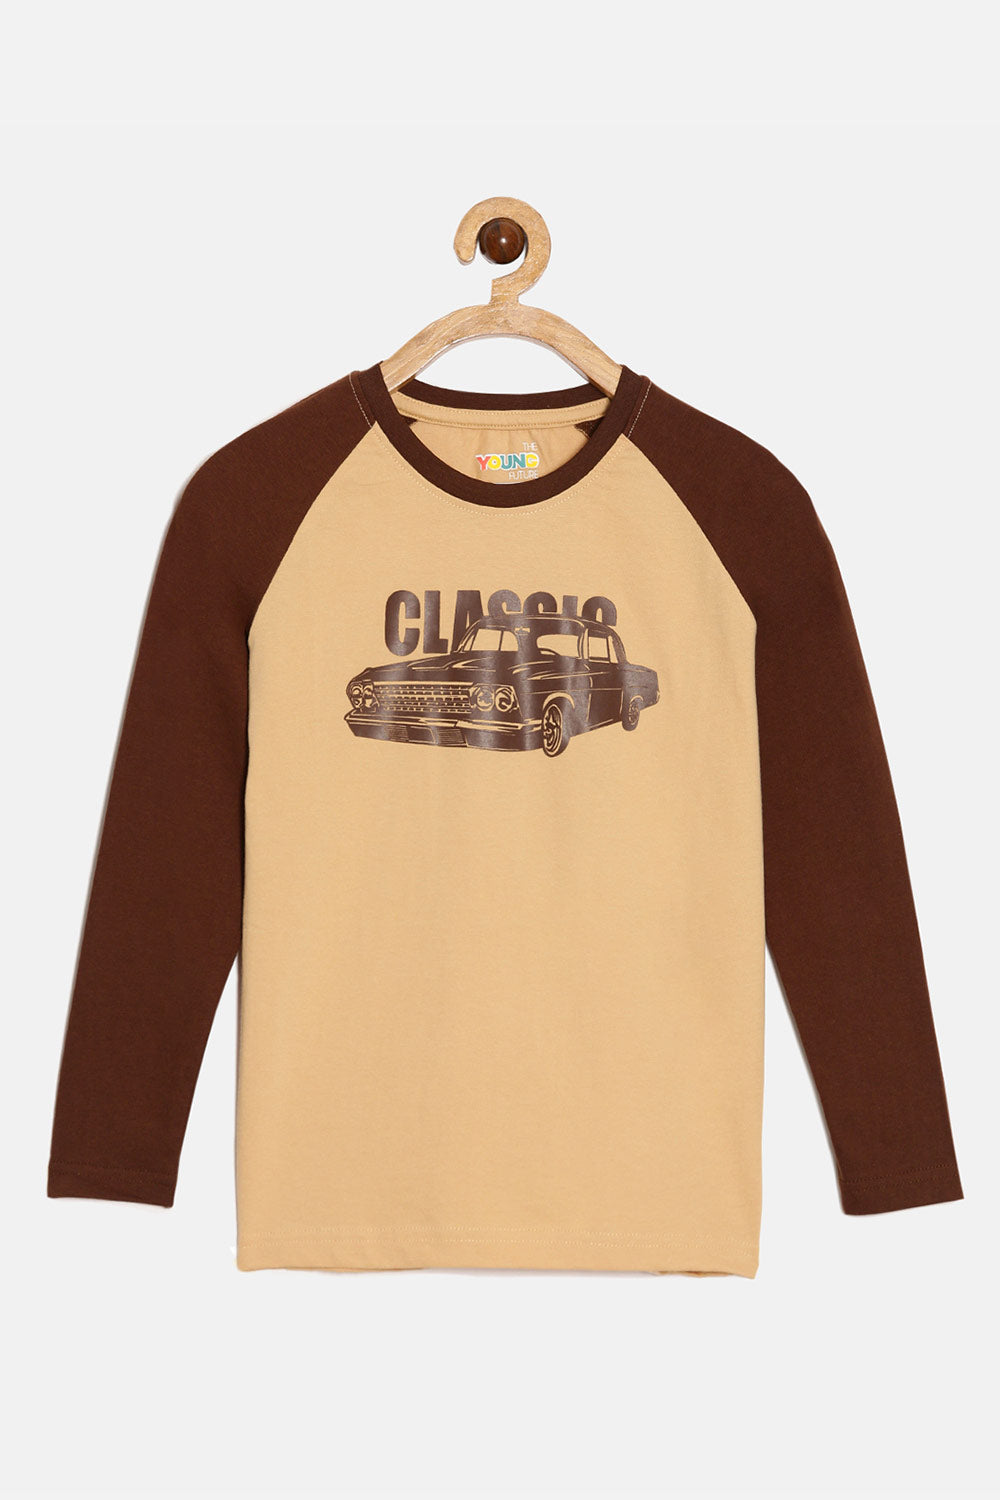 The Young Future - Boys T-shirt - Brown/Sandal - BC04